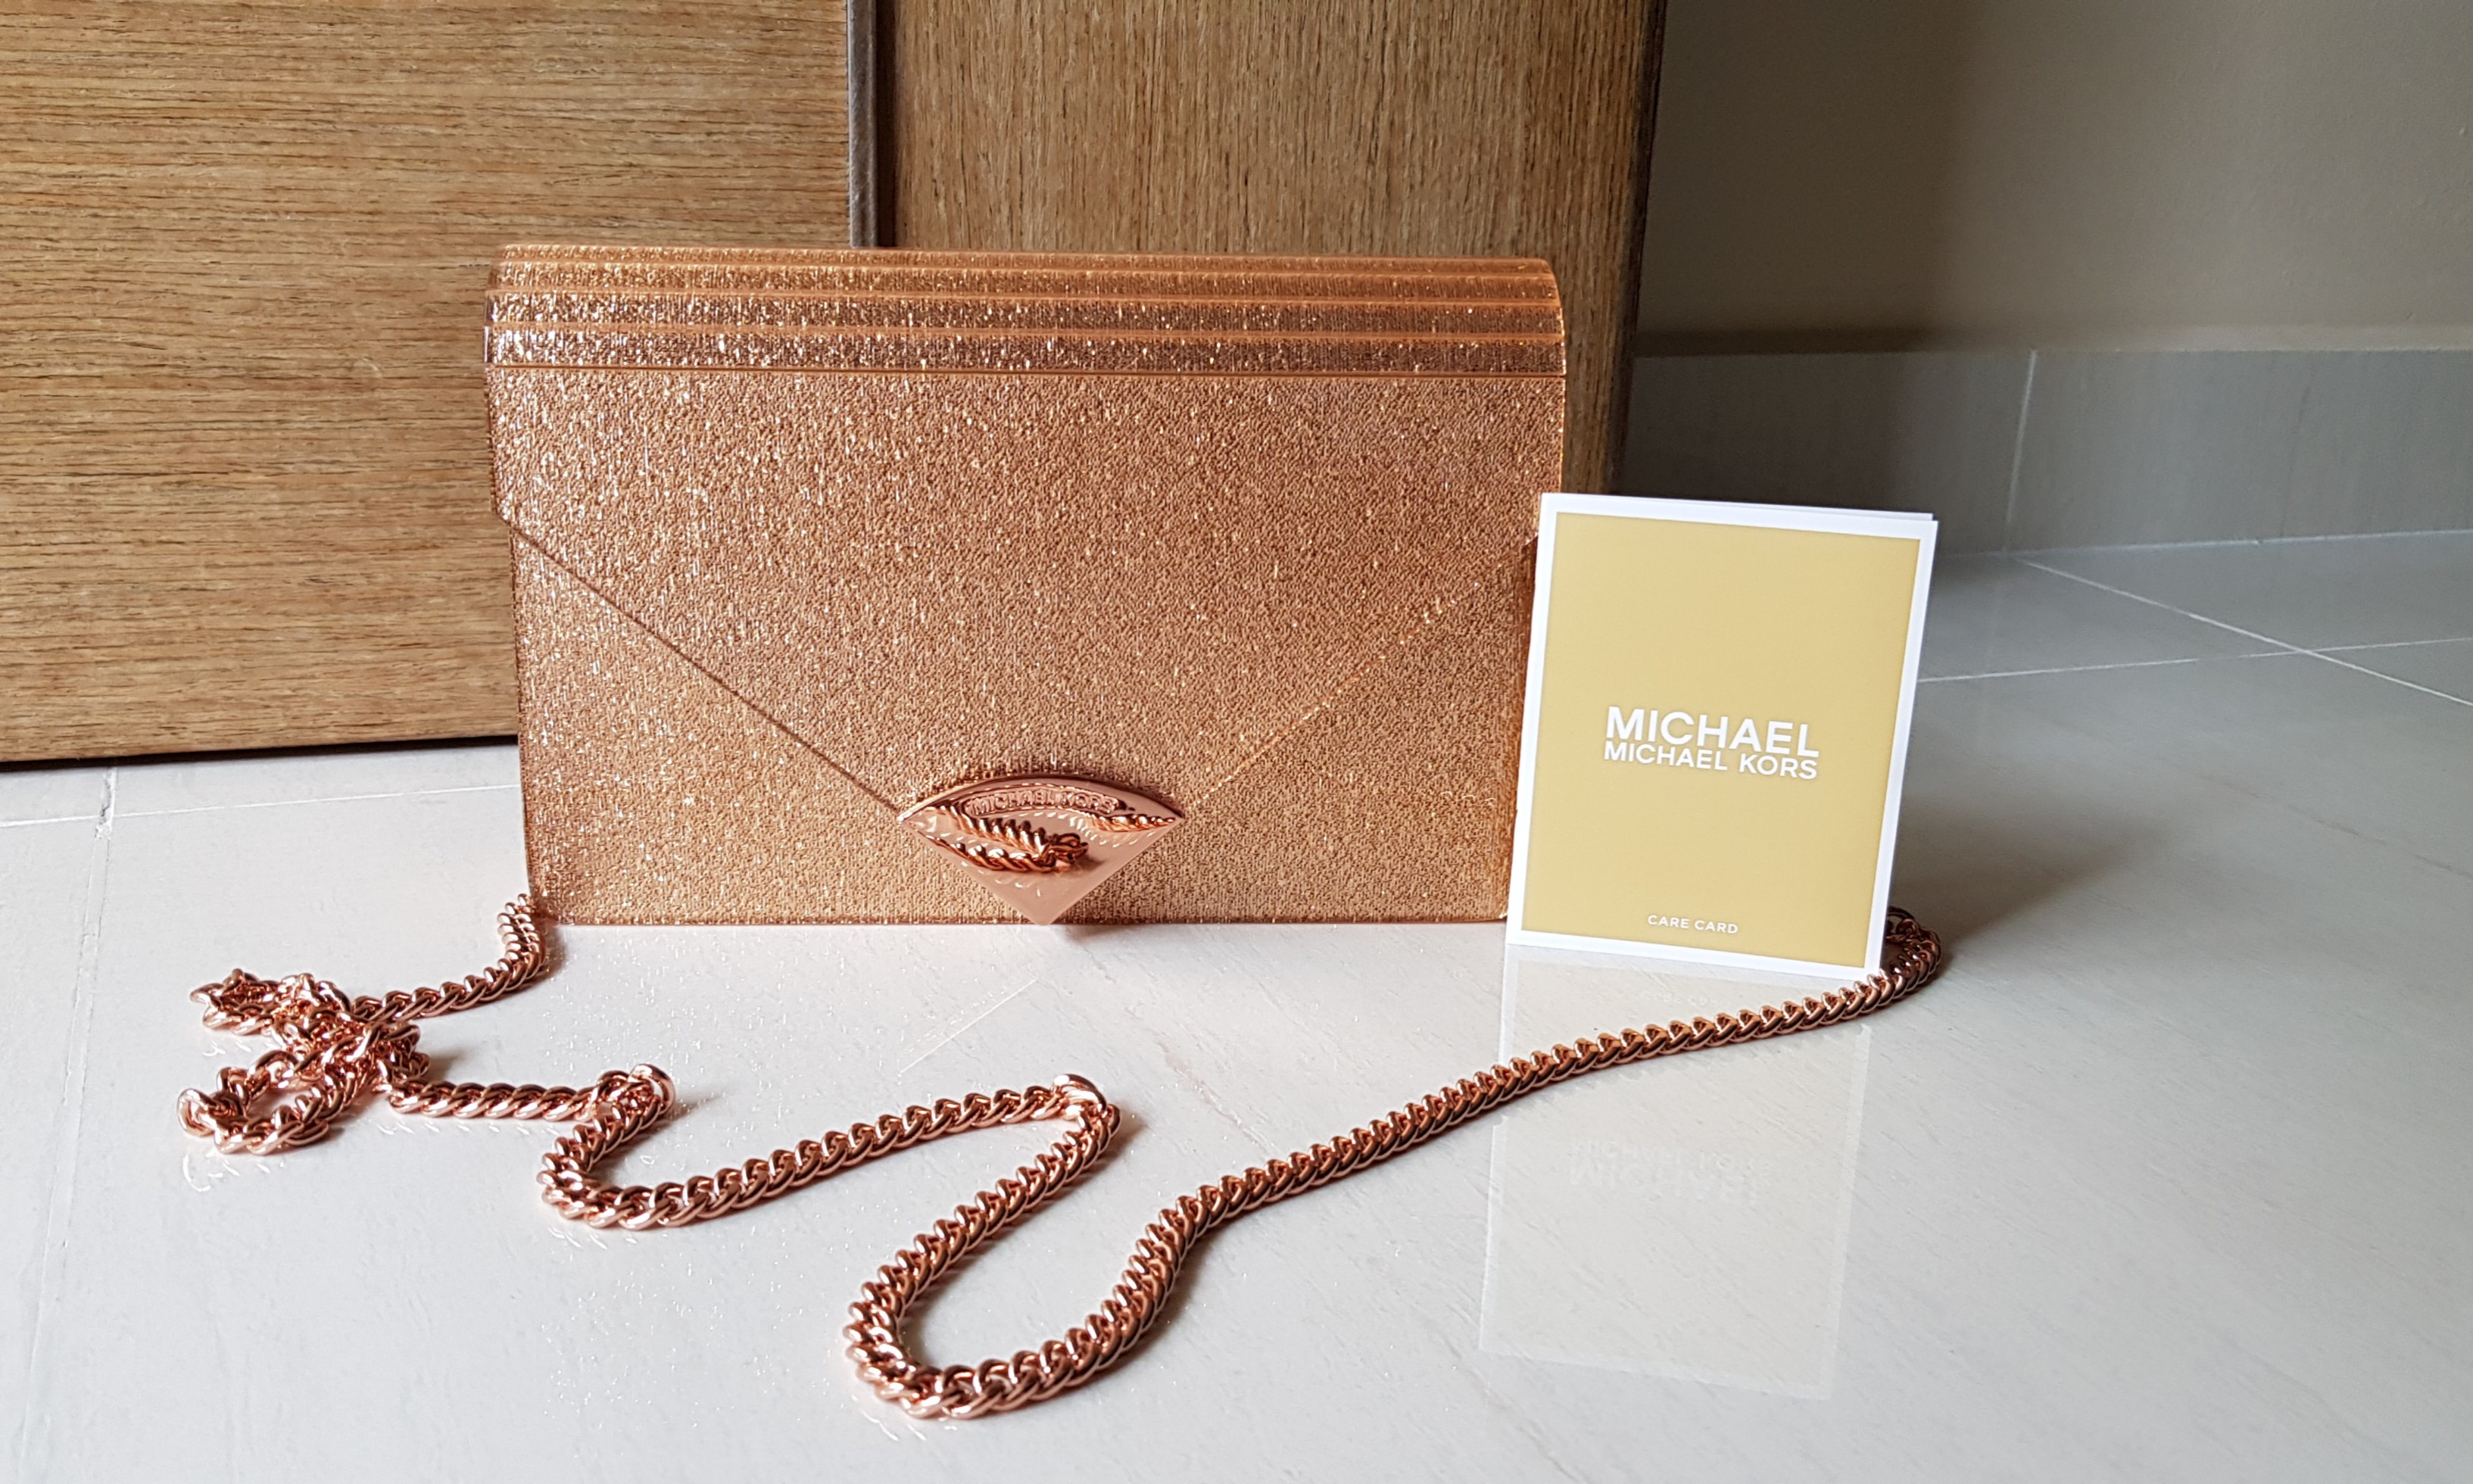 Sale! Authentic Michael Kors MK Barbara Envelope Crossbody Sling Bag Clutch  in Rosegold. Furla, Kate Spade, Tod's, Ted Baker also available., Luxury,  Bags & Wallets on Carousell